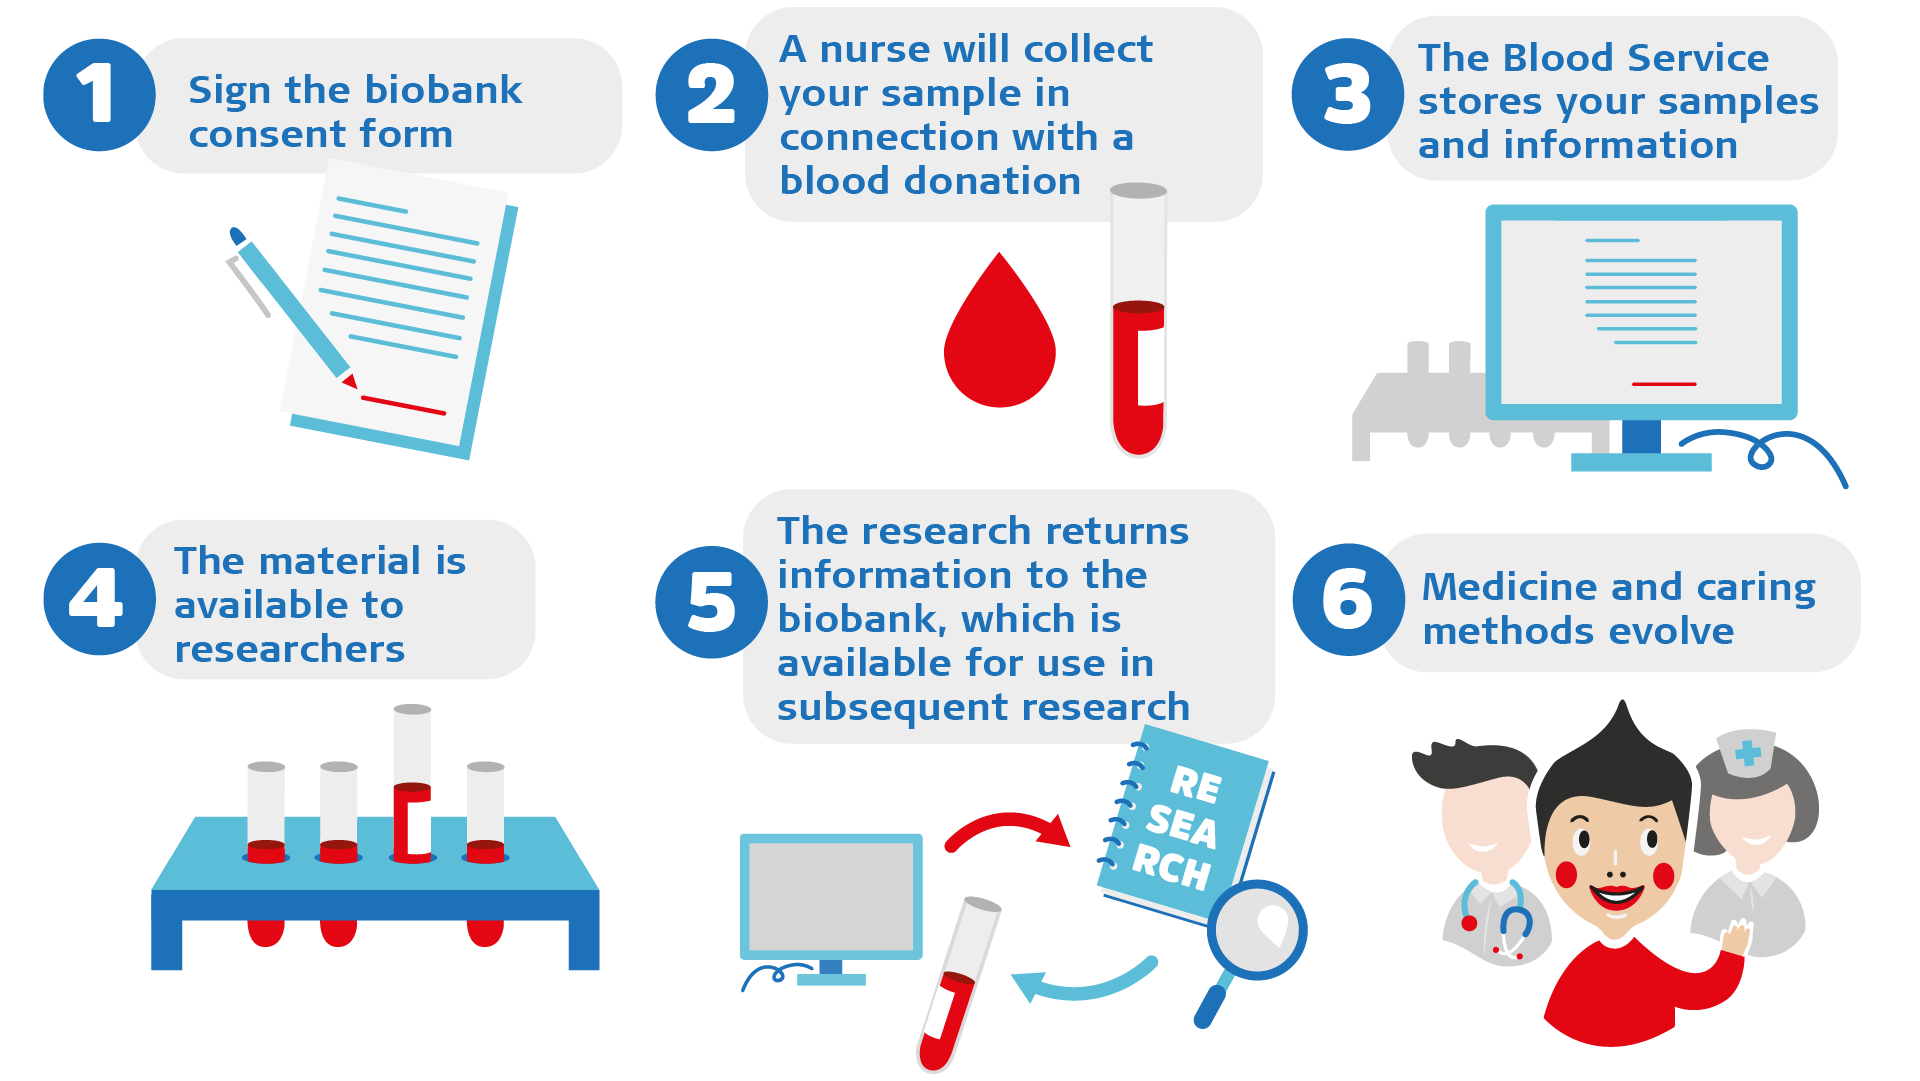 Infographic about joining the biobank. The same information can be found below in text.